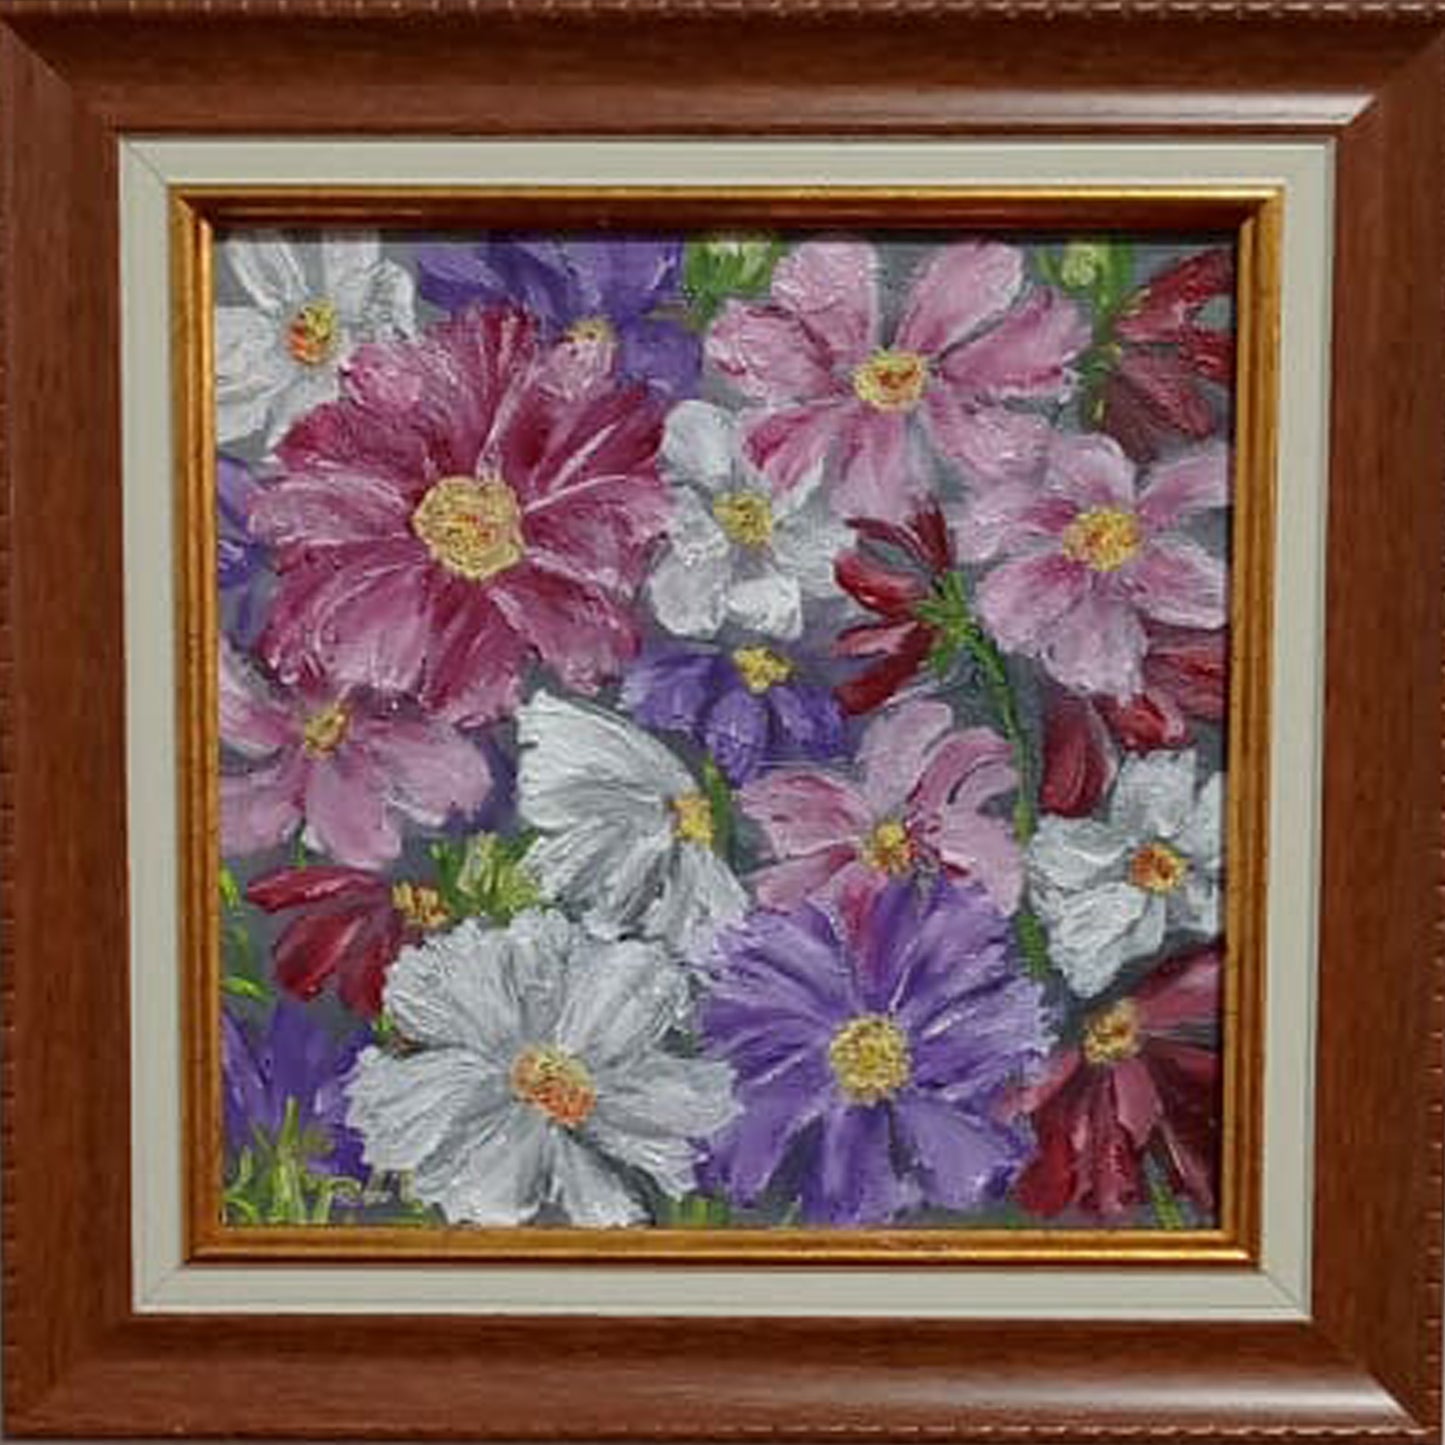 Cosmos flowers - Summer flowers - Original and unique oil painting